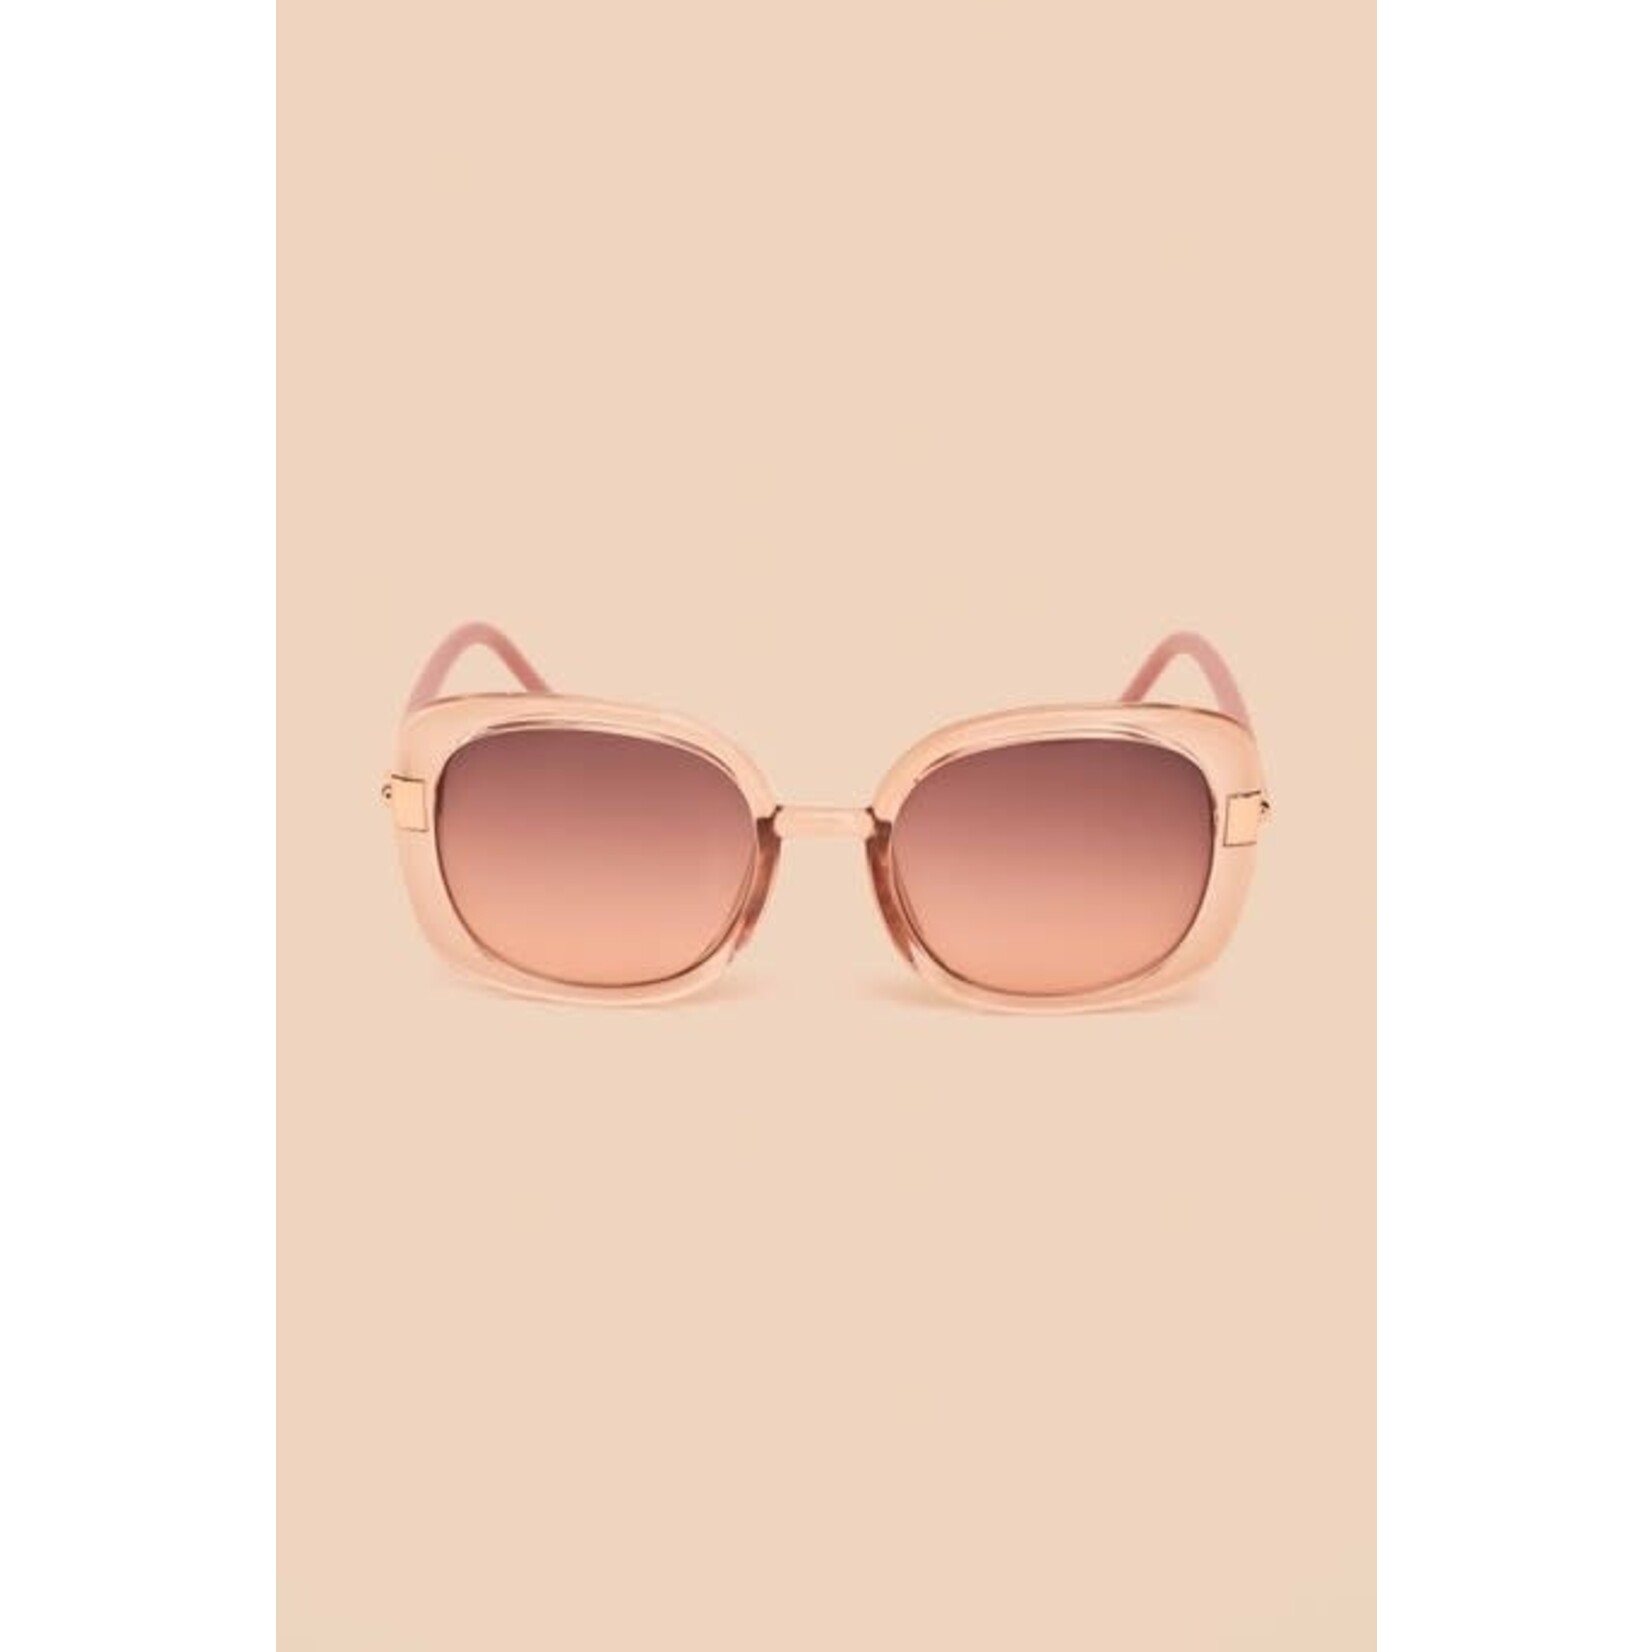 Powder Paige Limited Edition Sunglasses in Rose